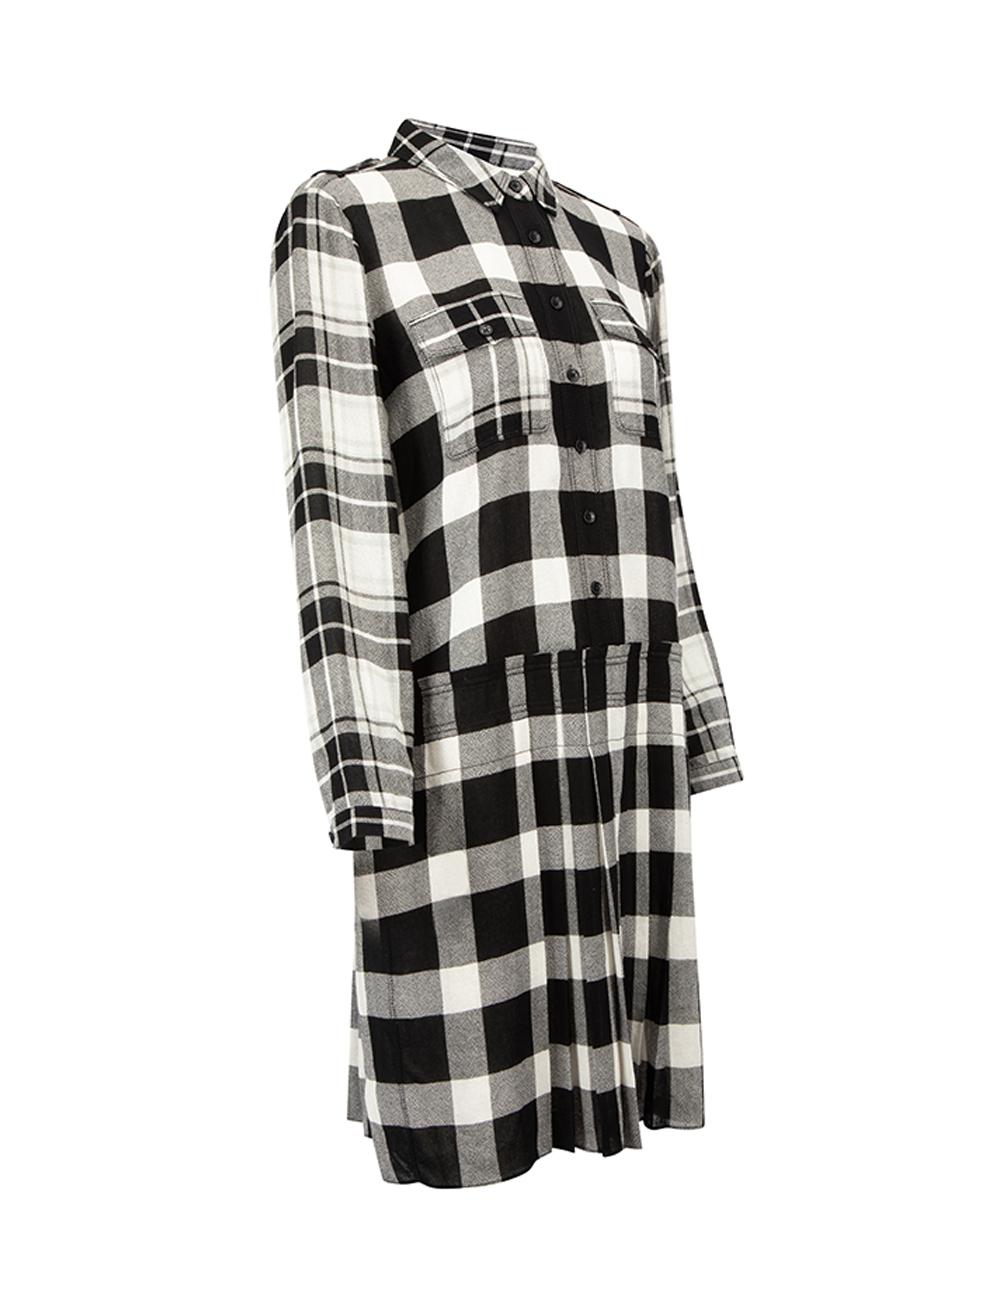 CONDITION is Very good. Hardly any visible wear to dress is evident on this used Burberry designer resale item. 



Details


Black and white

Synthetic

Mini dress

Check pattern

Front button up closure

Buttoned cuffs

Front buttoned patch